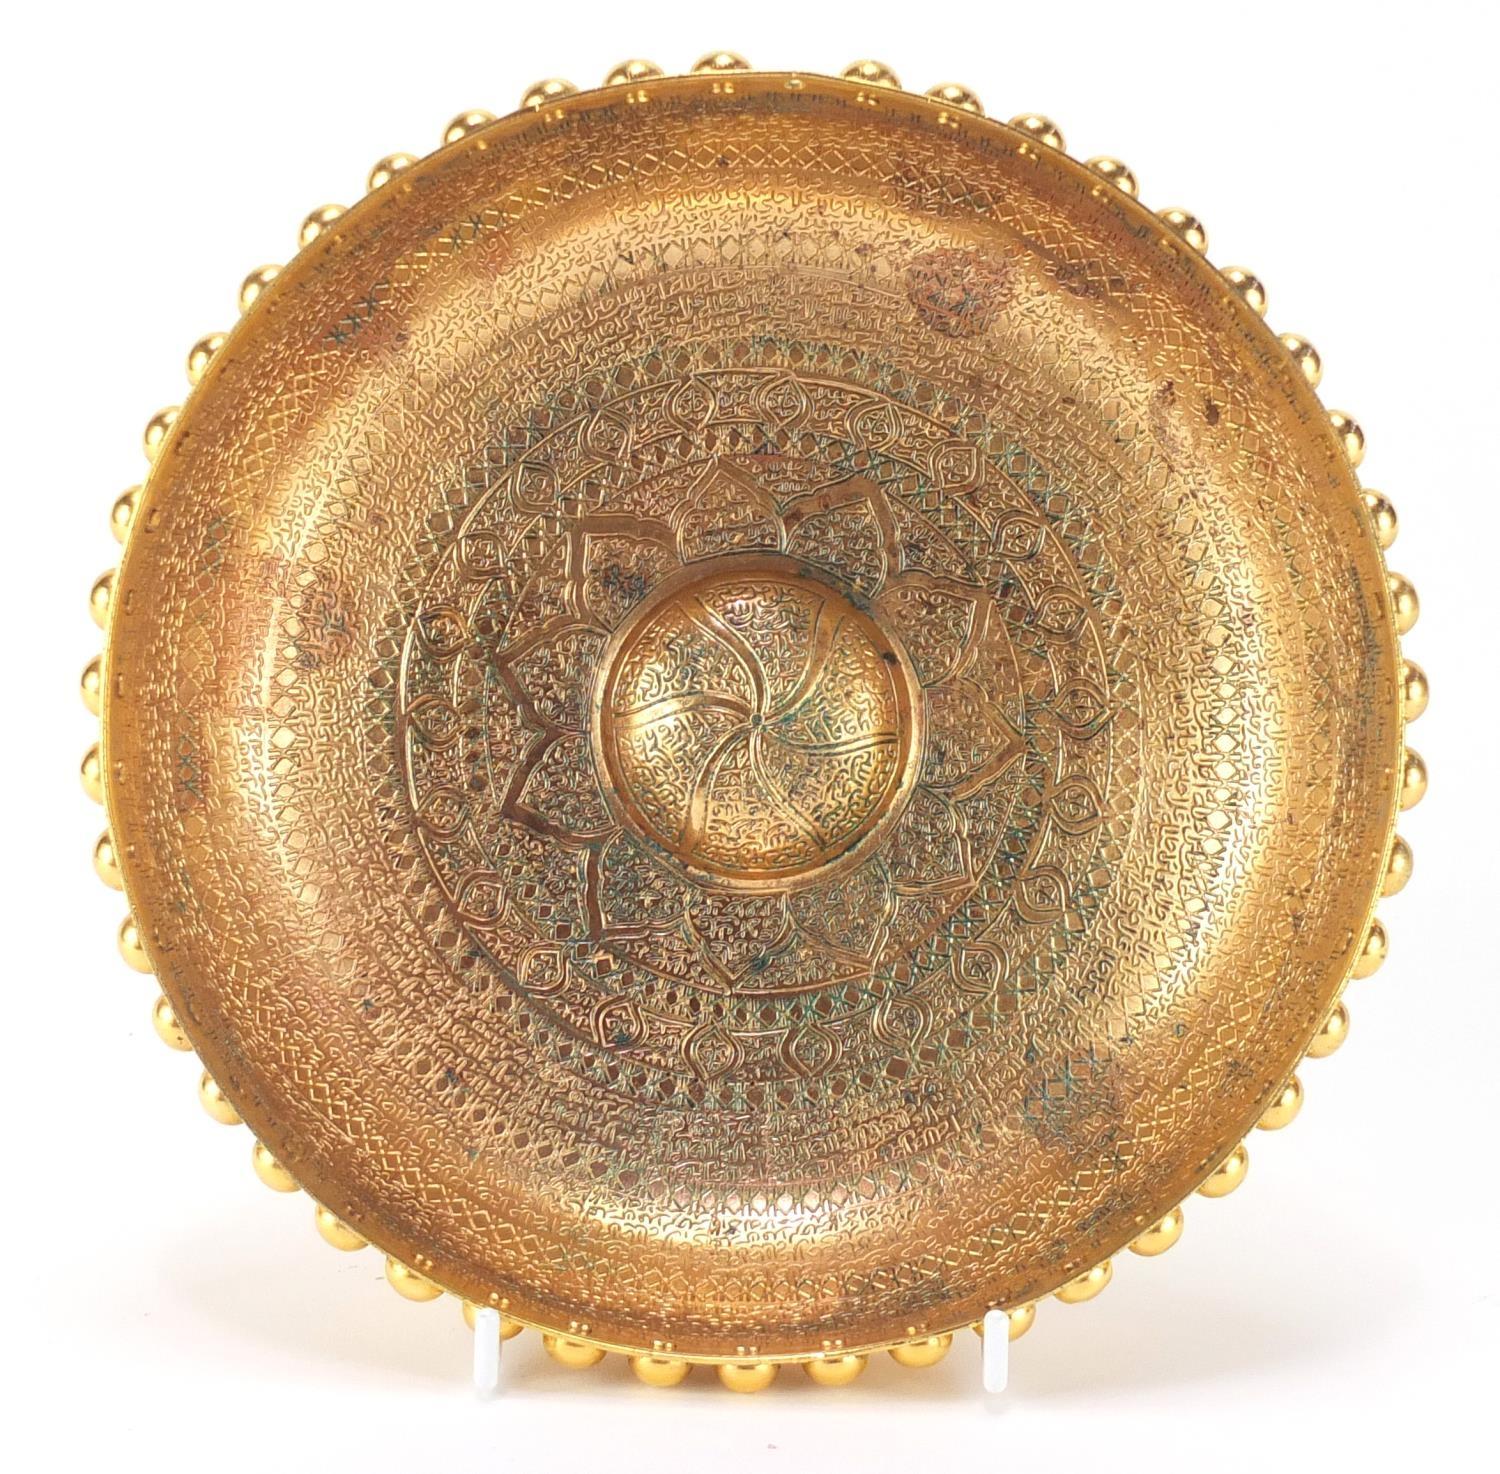 Ottoman gilt copper Hammam bowl with central flower head motif, profusely engraved with calligraphy,